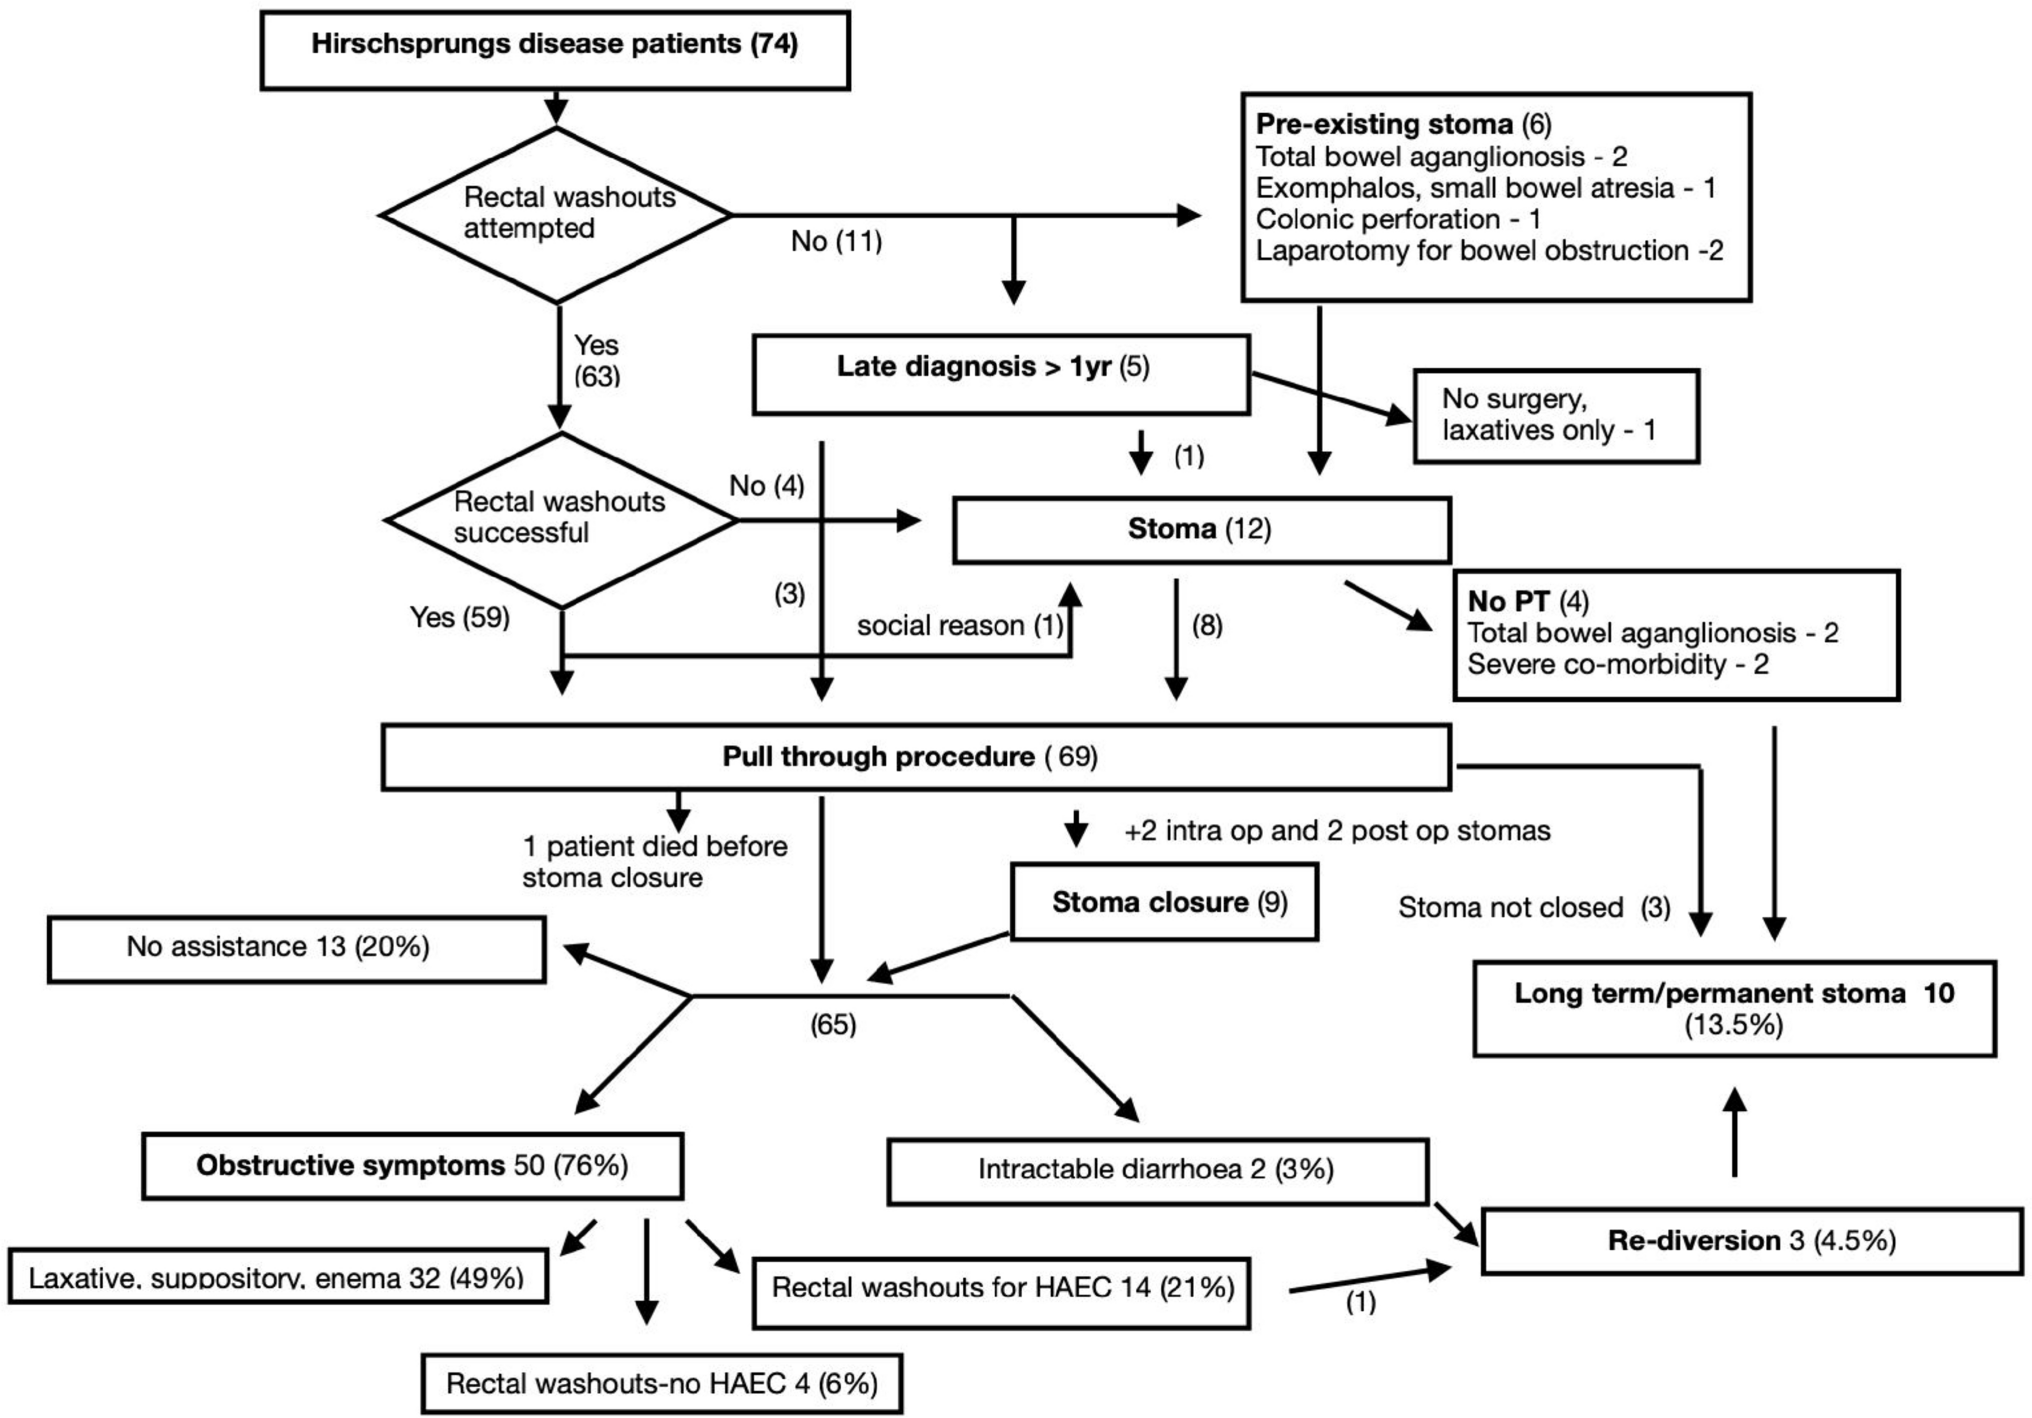 Impact of Colorectal Nurse Specialist supervised parental administration of rectal washouts on Hirschsprung’s disease outcomes: a retrospective review